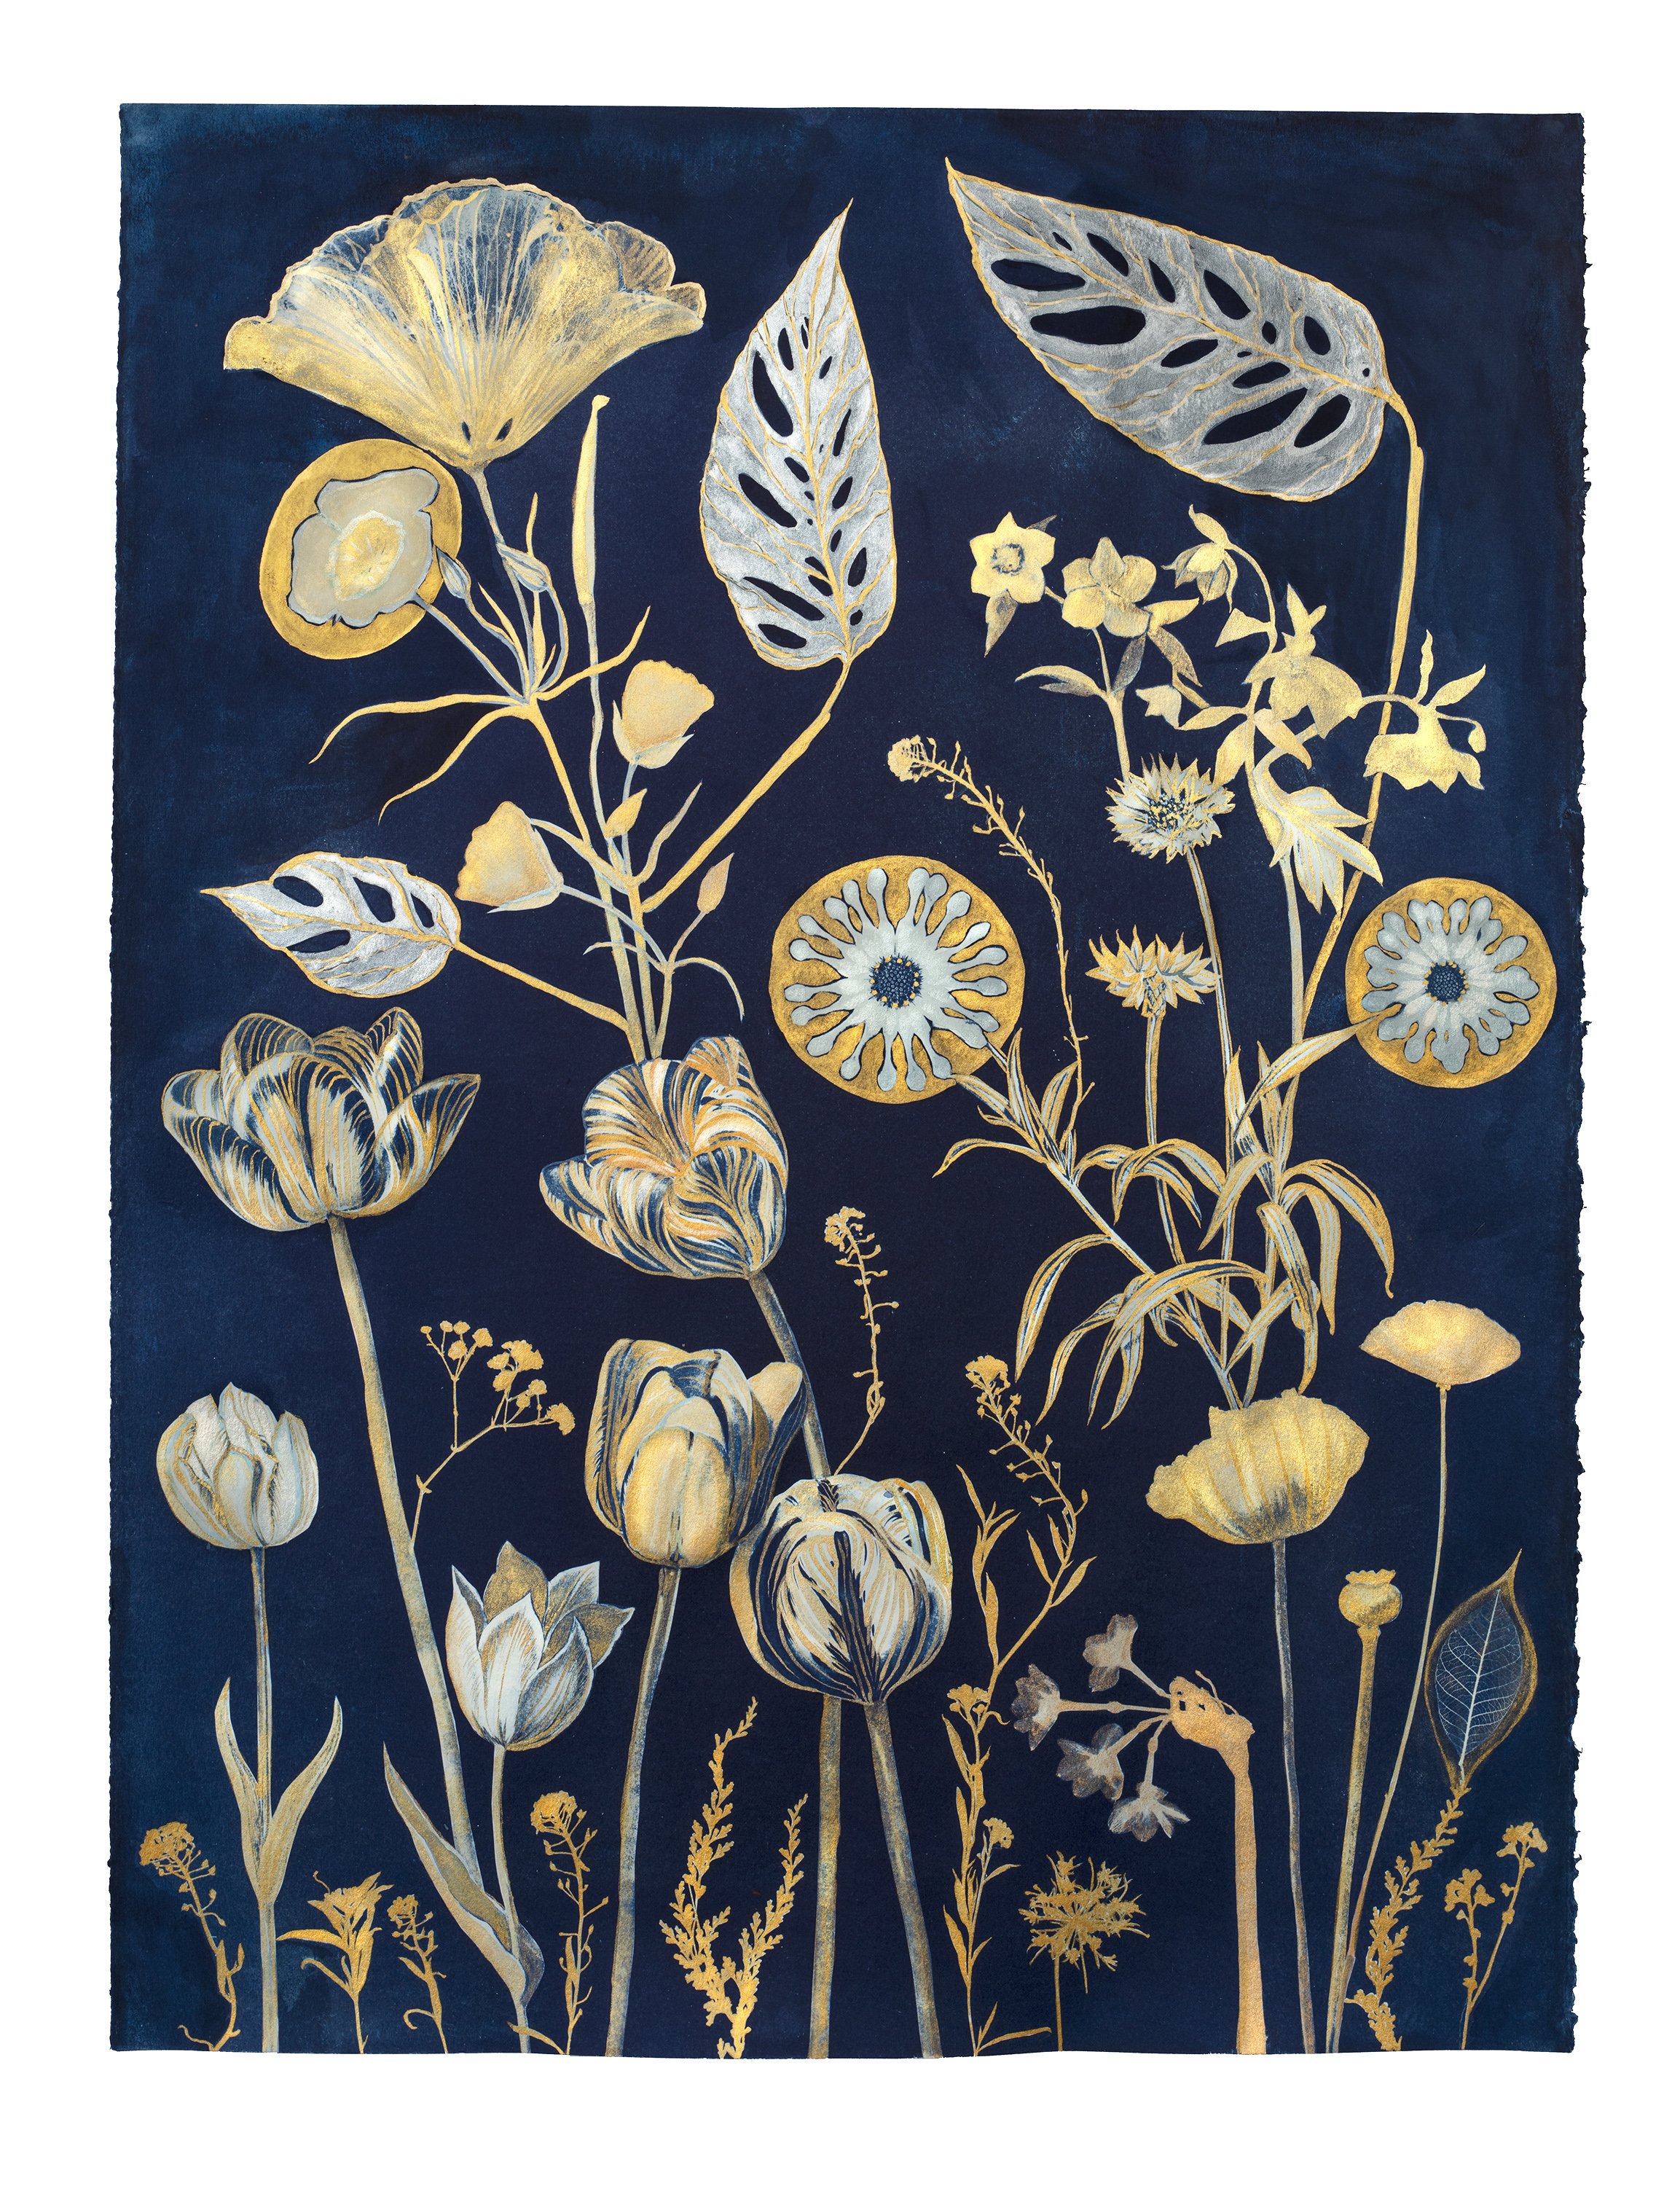 Cyanotype Painting (Gold Tulips, Leaves, etc)